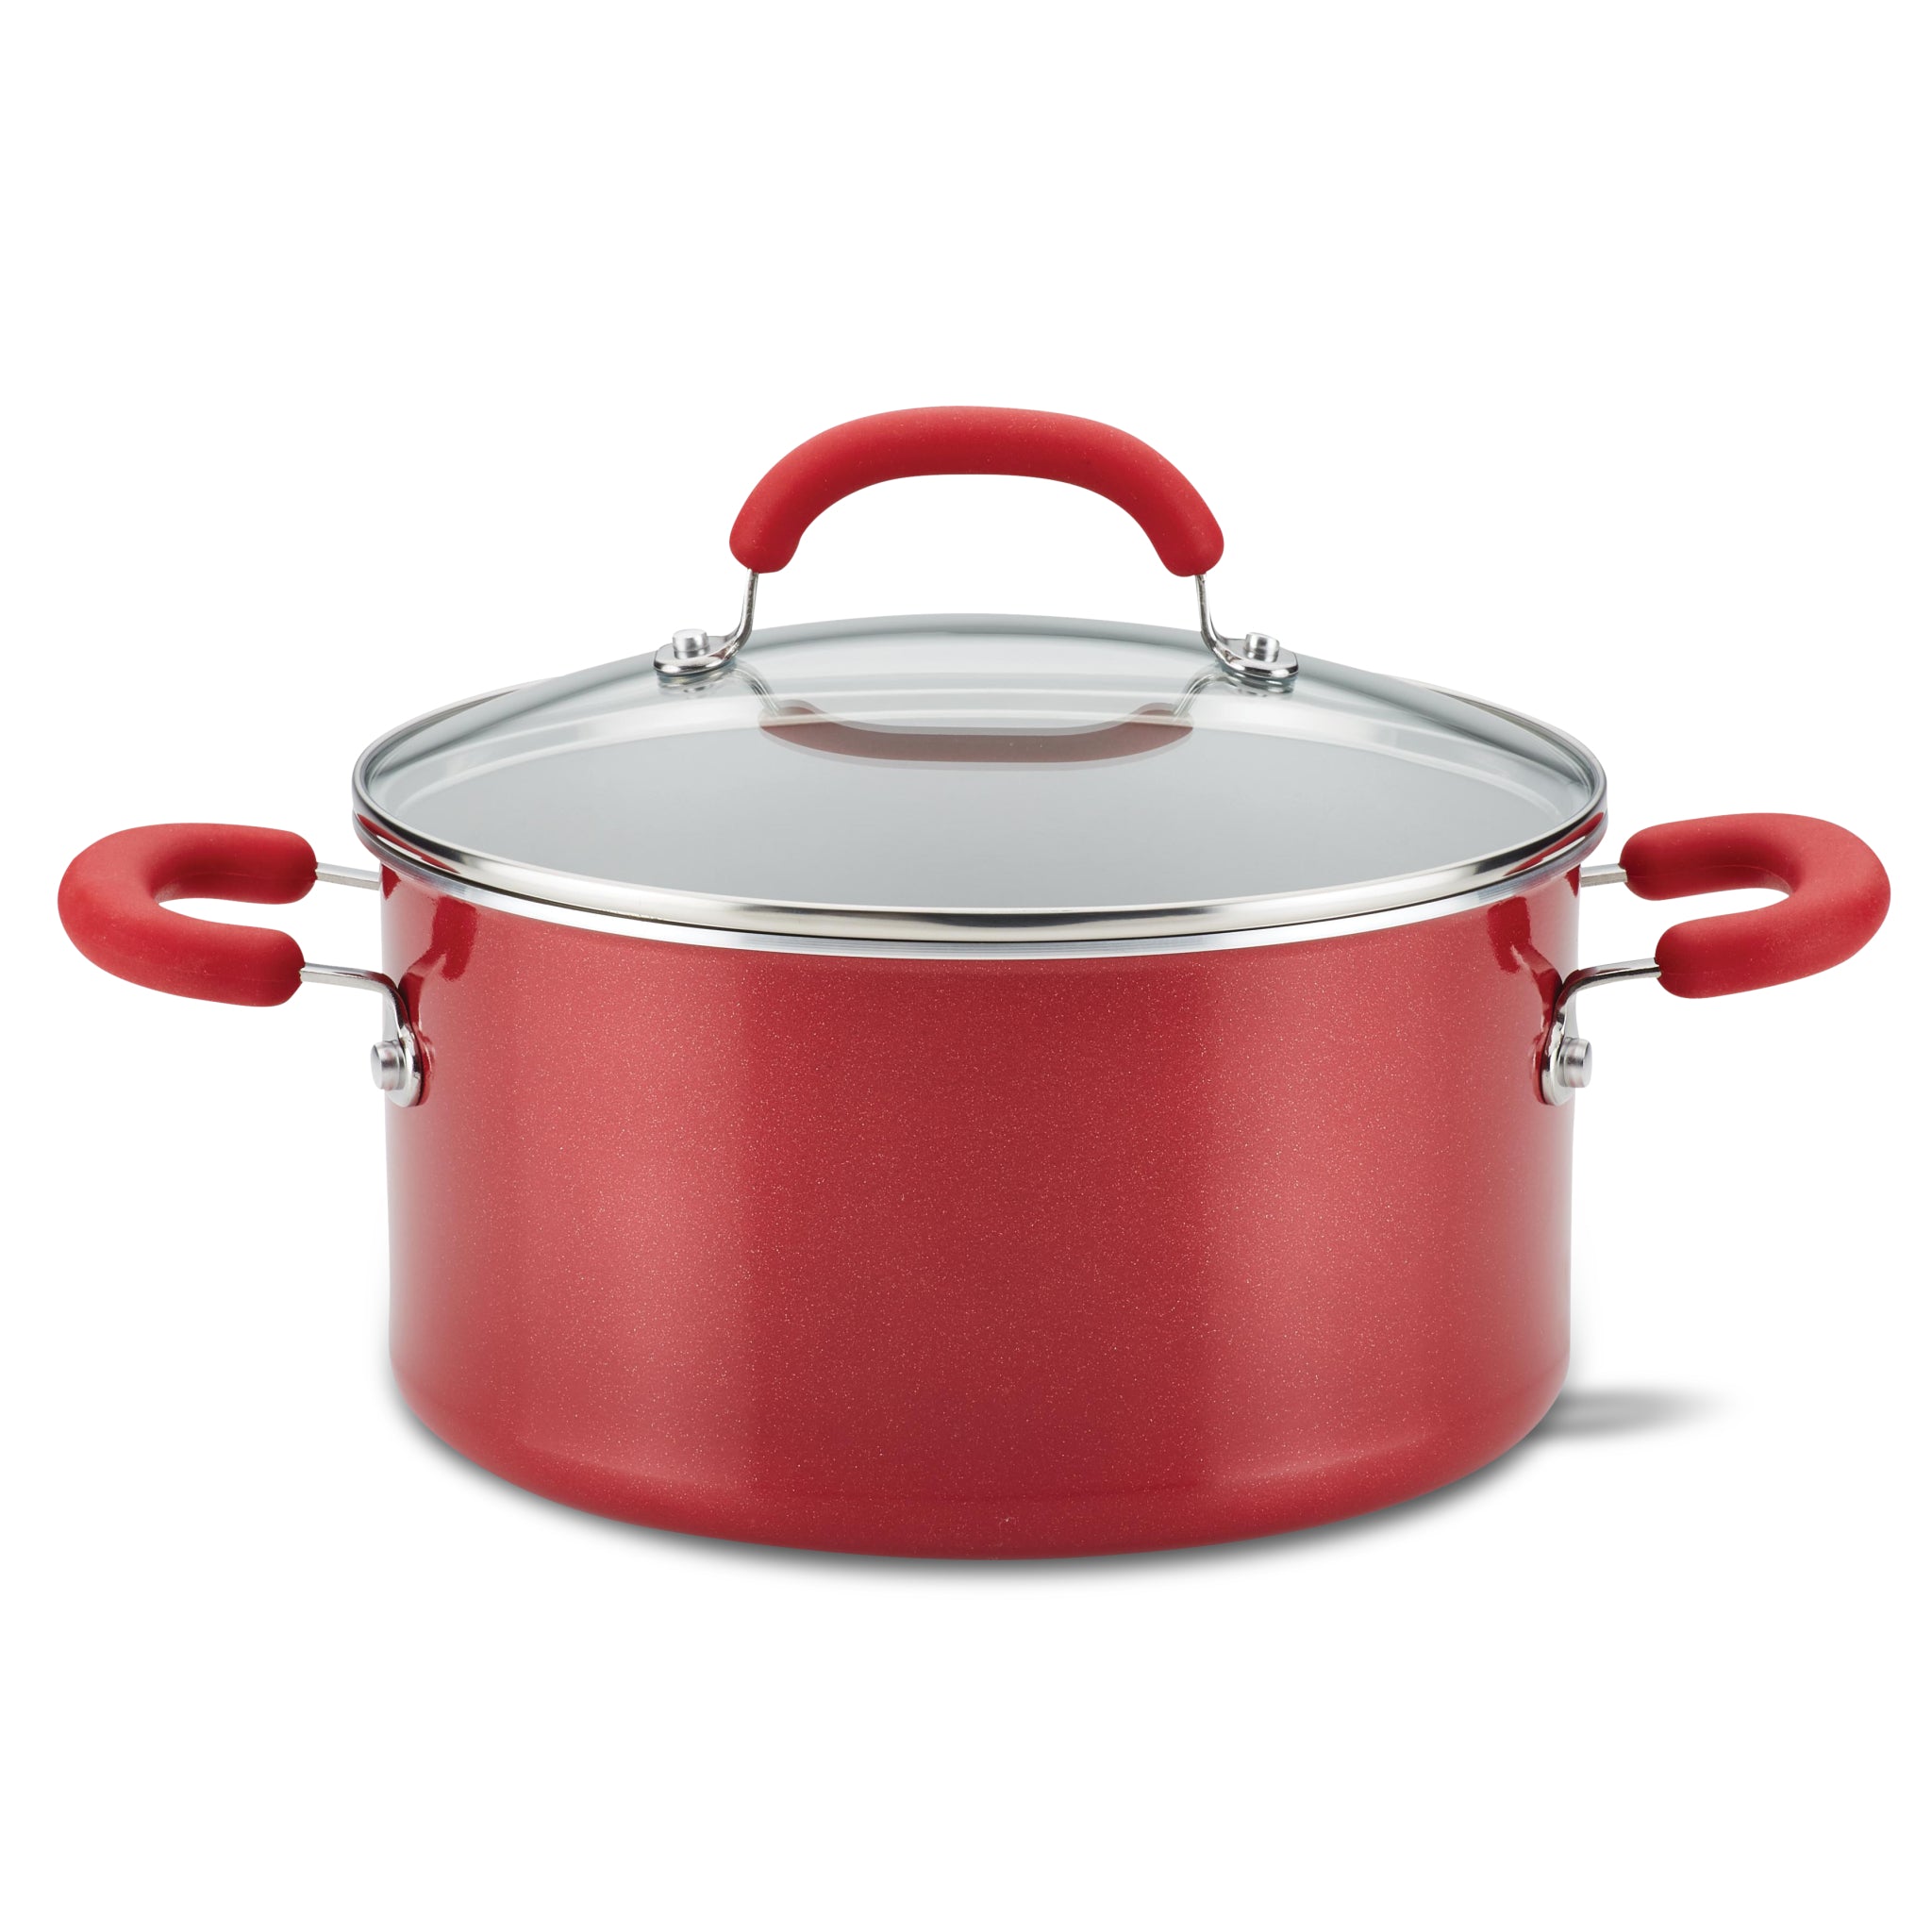 6-Quart Create Delicious Nonstick Induction Covered Stockpot